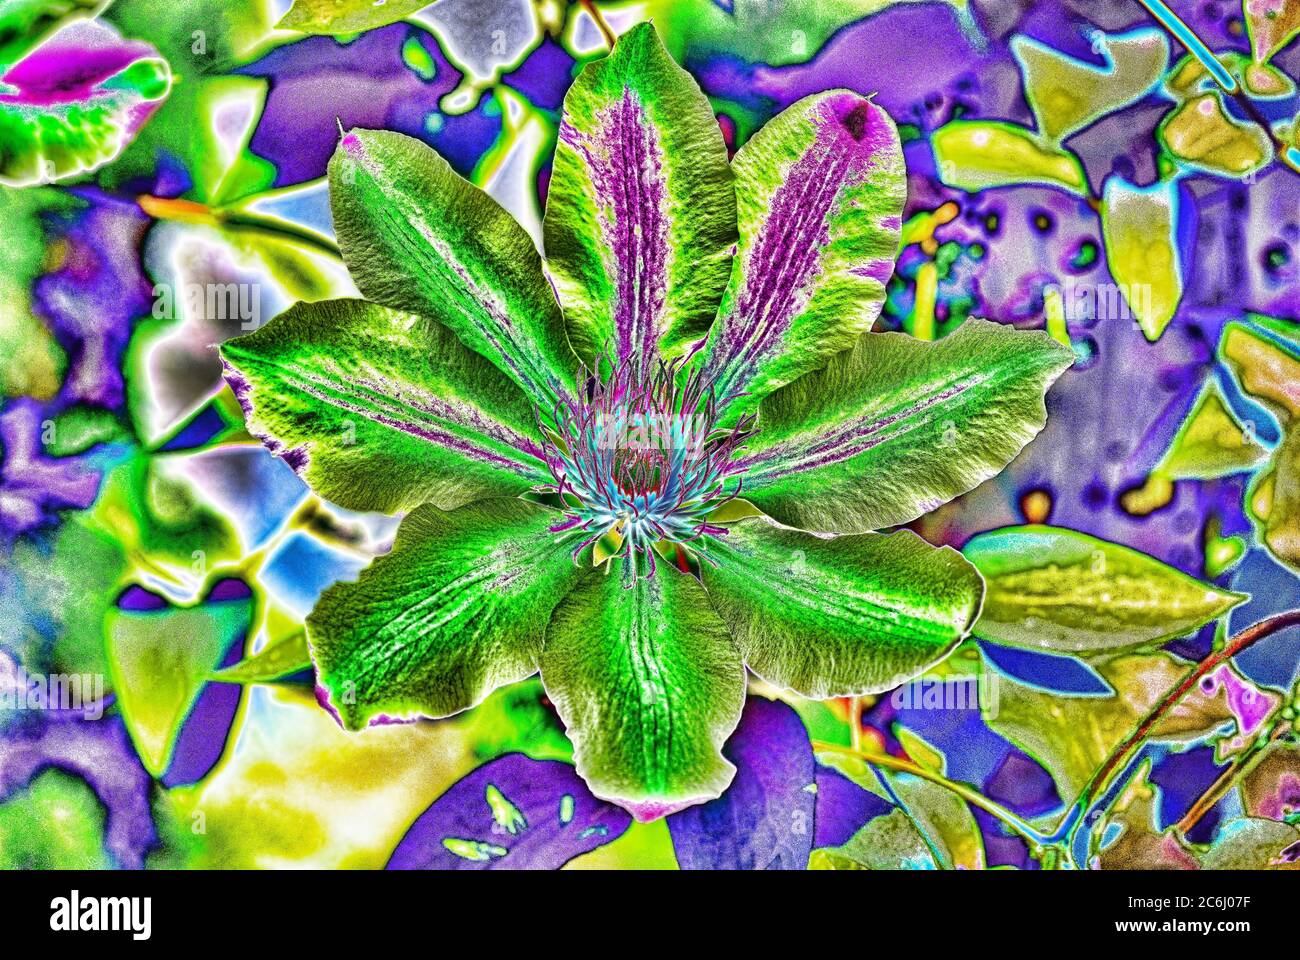 Digitally manipulated macro flower image. Psychedelic, Brilliant colours. Conceptual.  Green and blue shades,  alstroemeria flower heads arrangement. Stock Photo